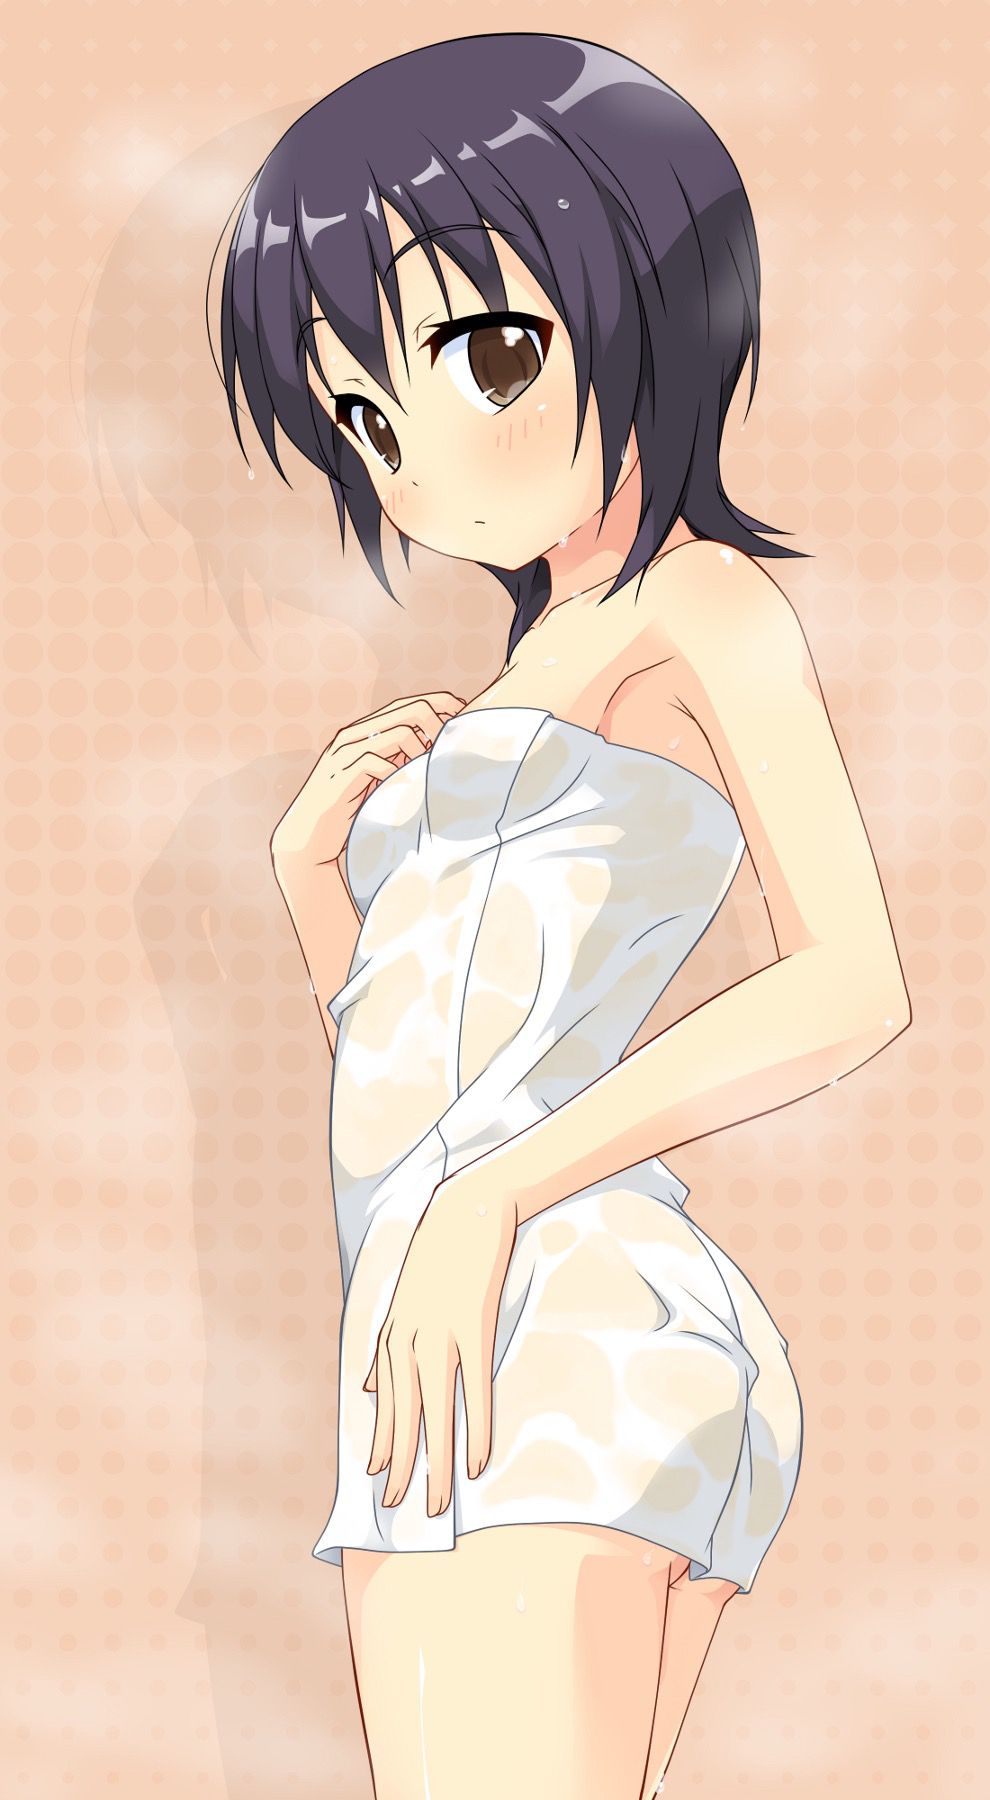 [2nd] Now I want to Hin nude towel appearance of beautiful girl secondary erotic image part 11 [Naked towel] 29